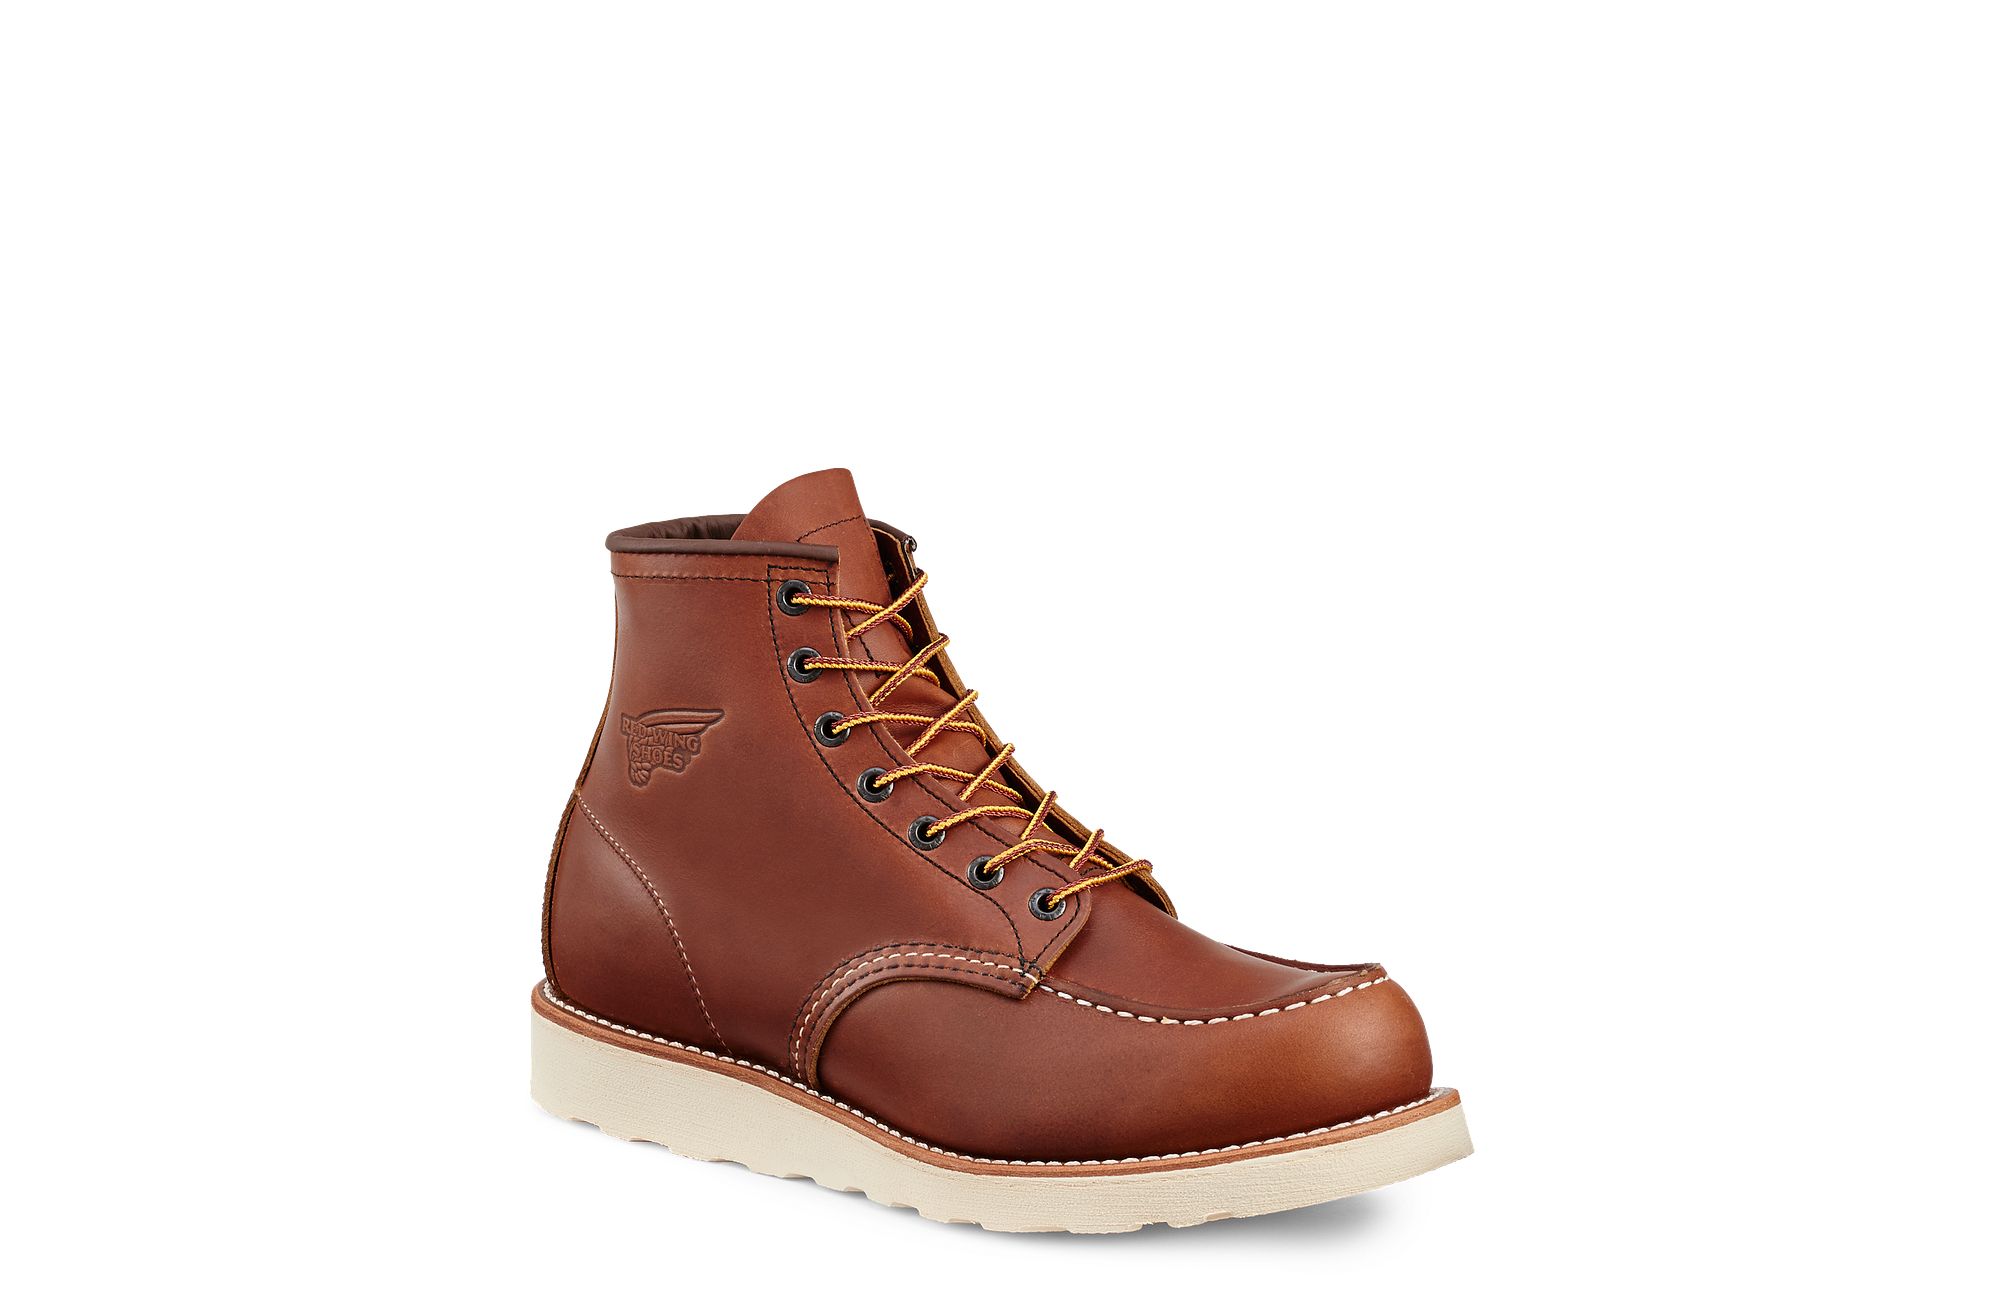 Arkæolog Clancy vokal Traction Tred | Red Wing